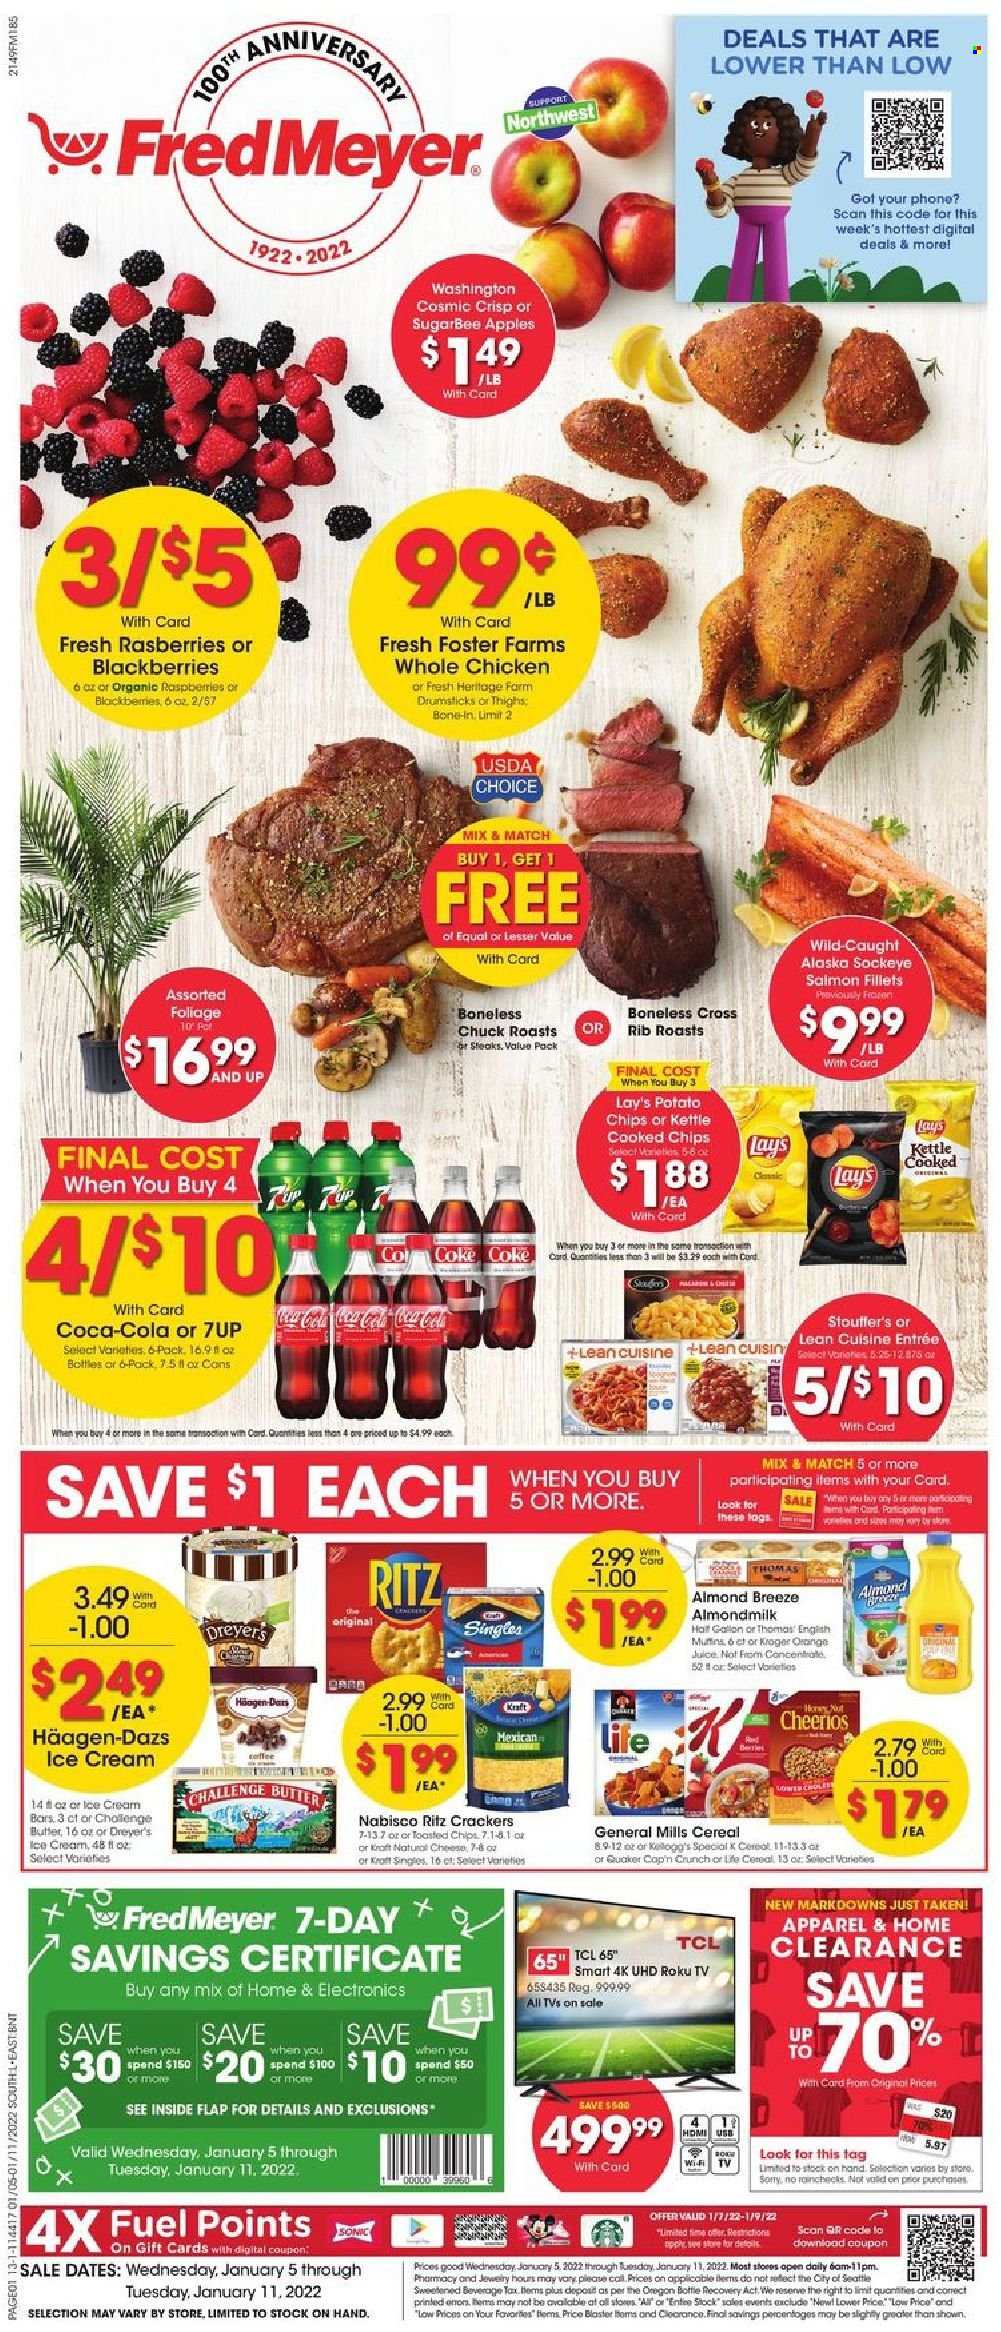 thumbnail - Fred Meyer Flyer - 01/05/2022 - 01/11/2022 - Sales products - Sony, apples, blackberries, oranges, salmon, salmon fillet, Lean Cuisine, Kraft®, cheese, almond milk, Almond Breeze, butter, ice cream, Häagen-Dazs, Stouffer's, crackers, RITZ, potato chips, chips, Lay’s, cereals, Cheerios, Coca-Cola, juice, 7UP, whole chicken, steak, pot, TCL, roku tv, TV, hat. Page 1.